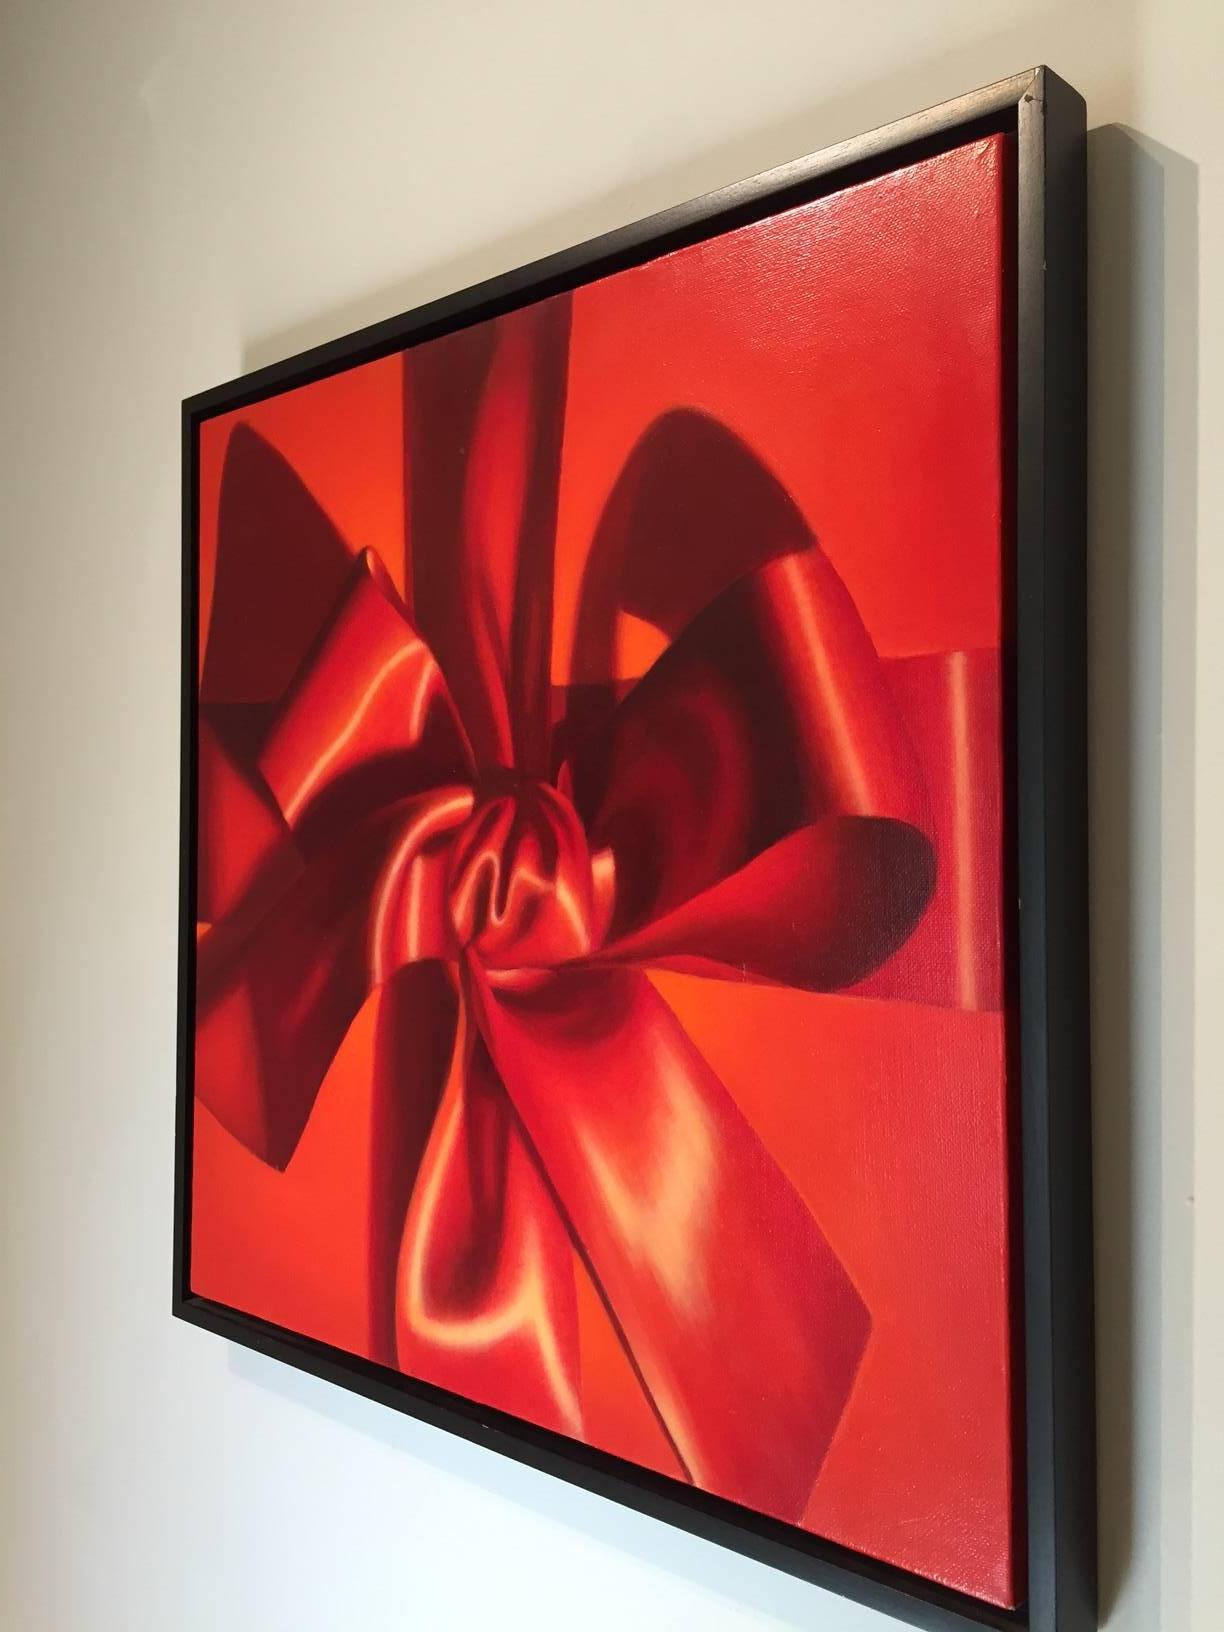 Unwrap Me / oil on linen - Red Still-Life Painting by Elizabeth Barlow